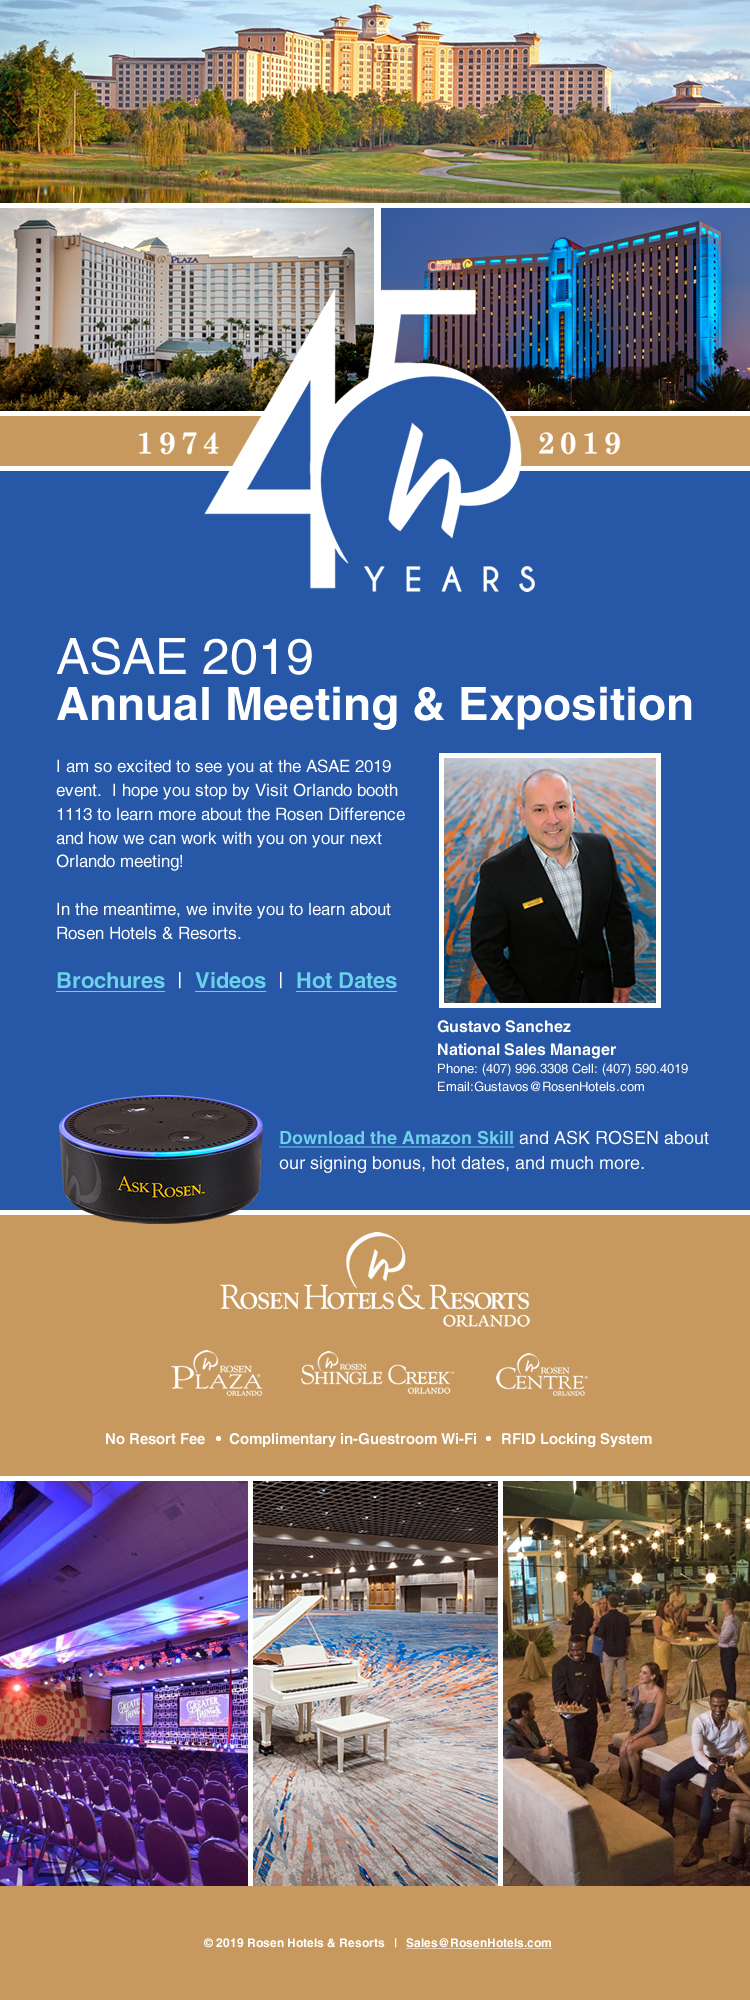 Celebrating 45 Years | 1974-2019
		  
ASAE 2019
Annual Meeting & Exposition
		  
I am so excited to see you at the ASAE 2019 event.  I hope you stop by Visit Orlando booth 1113 to learn more about the Rosen Difference and how we can work with you on your next Orlando meeting!

In the meantime, we invite you to learn about Rosen Hotels & Resorts.

Gustavo Sanchez
National Sales Manager
Phone: (407) 996.3308 Cell: (407) 590.4019
Email:Gustavos@RosenHotels.com
		  
Download the Amazon Skill and ASK ROSEN about our signing bonus, hot dates, and much more.
		  
No Resort Fee | Complimentary in-Guestroom Wi-Fi | RFID Locking System
		  
 2019 Rosen Hotels & Resorts   |   Sales@RosenHotels.com